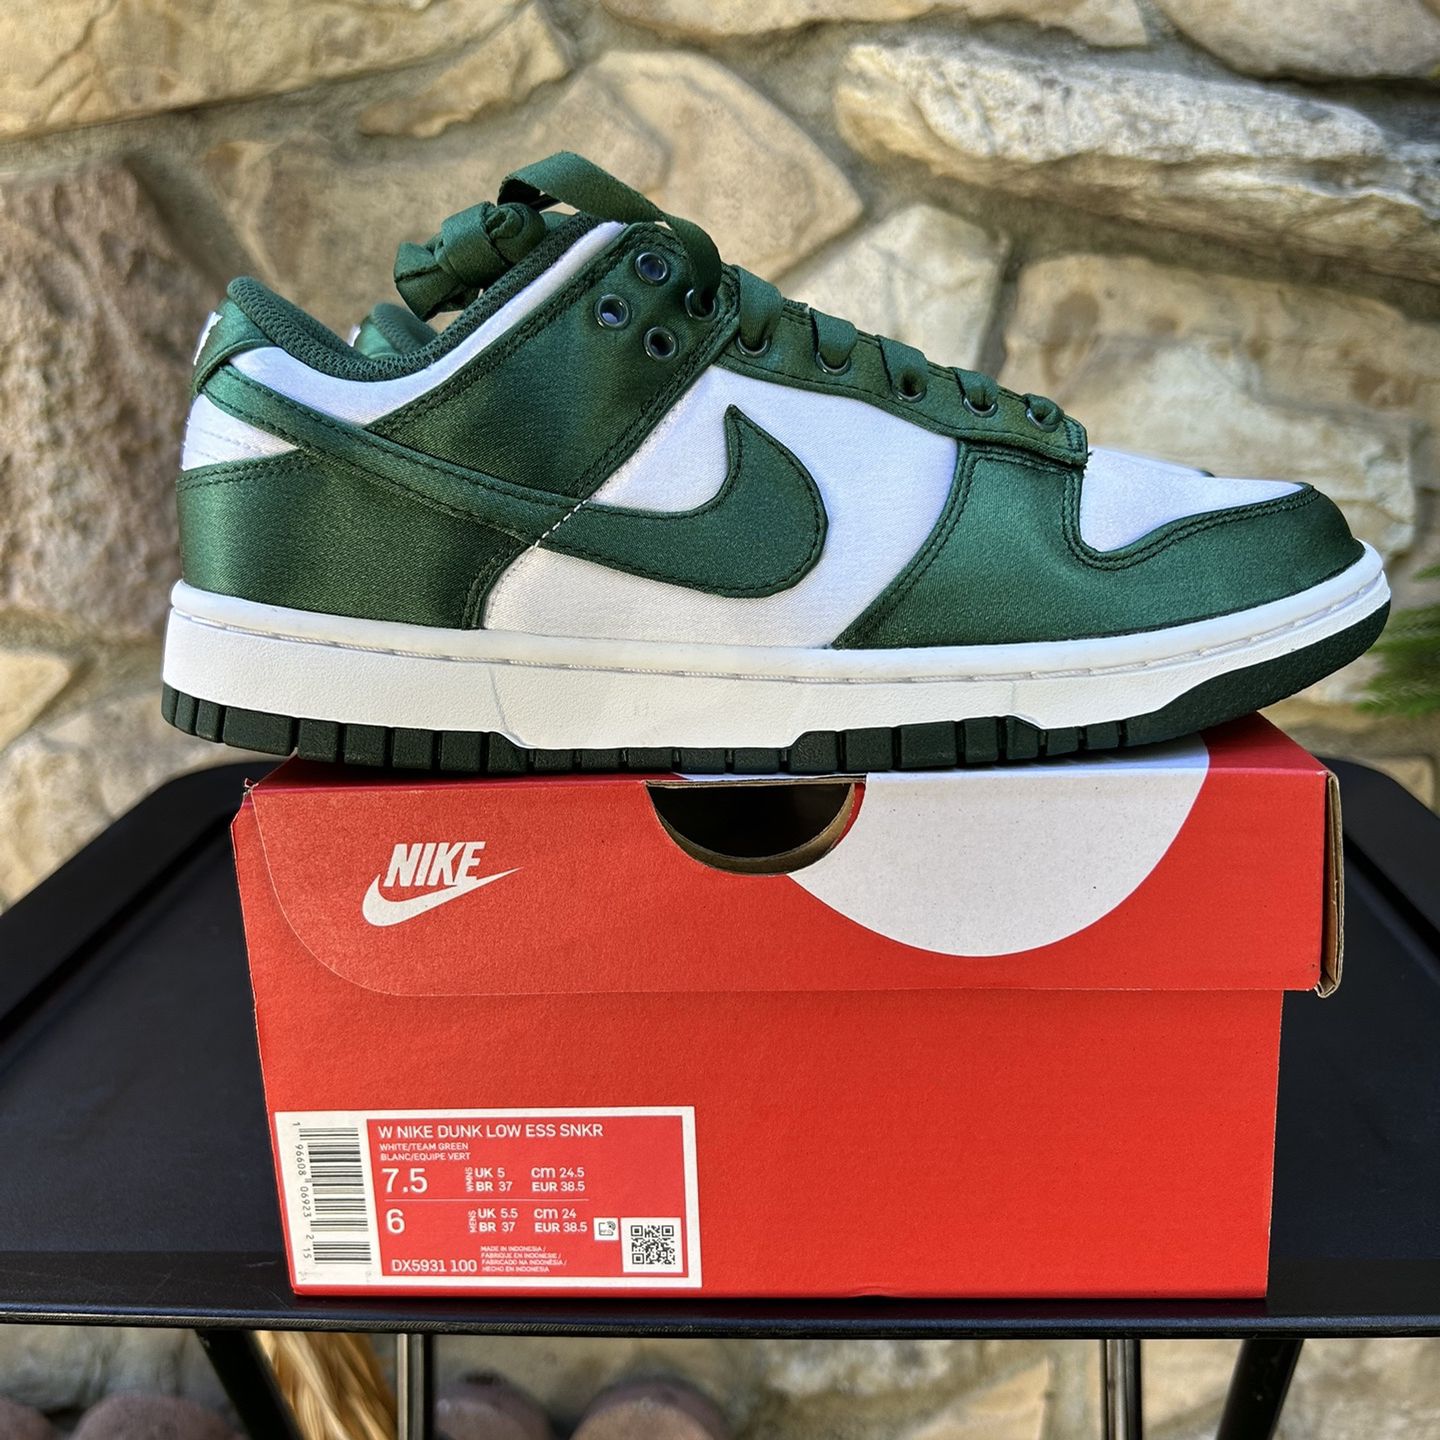 Nike Dunk Low “Satin Green” Size 7.5 Women's/ 6Y for Sale in Los